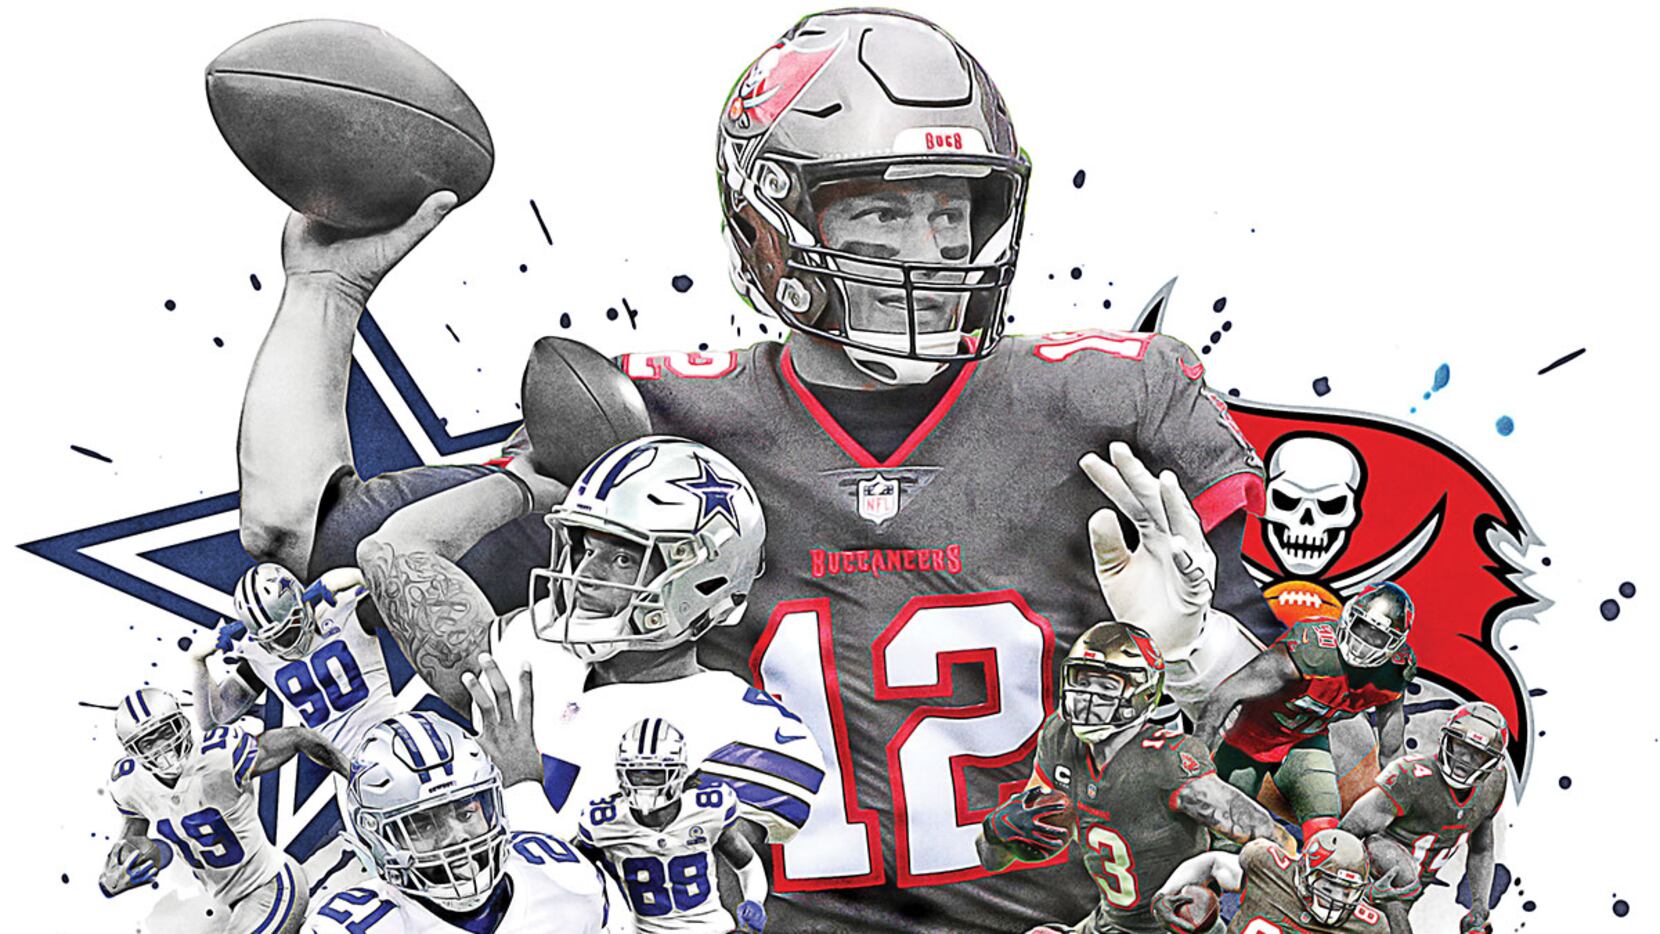 2021 NFL Kickoff: What to watch for in Cowboys-Buccaneers